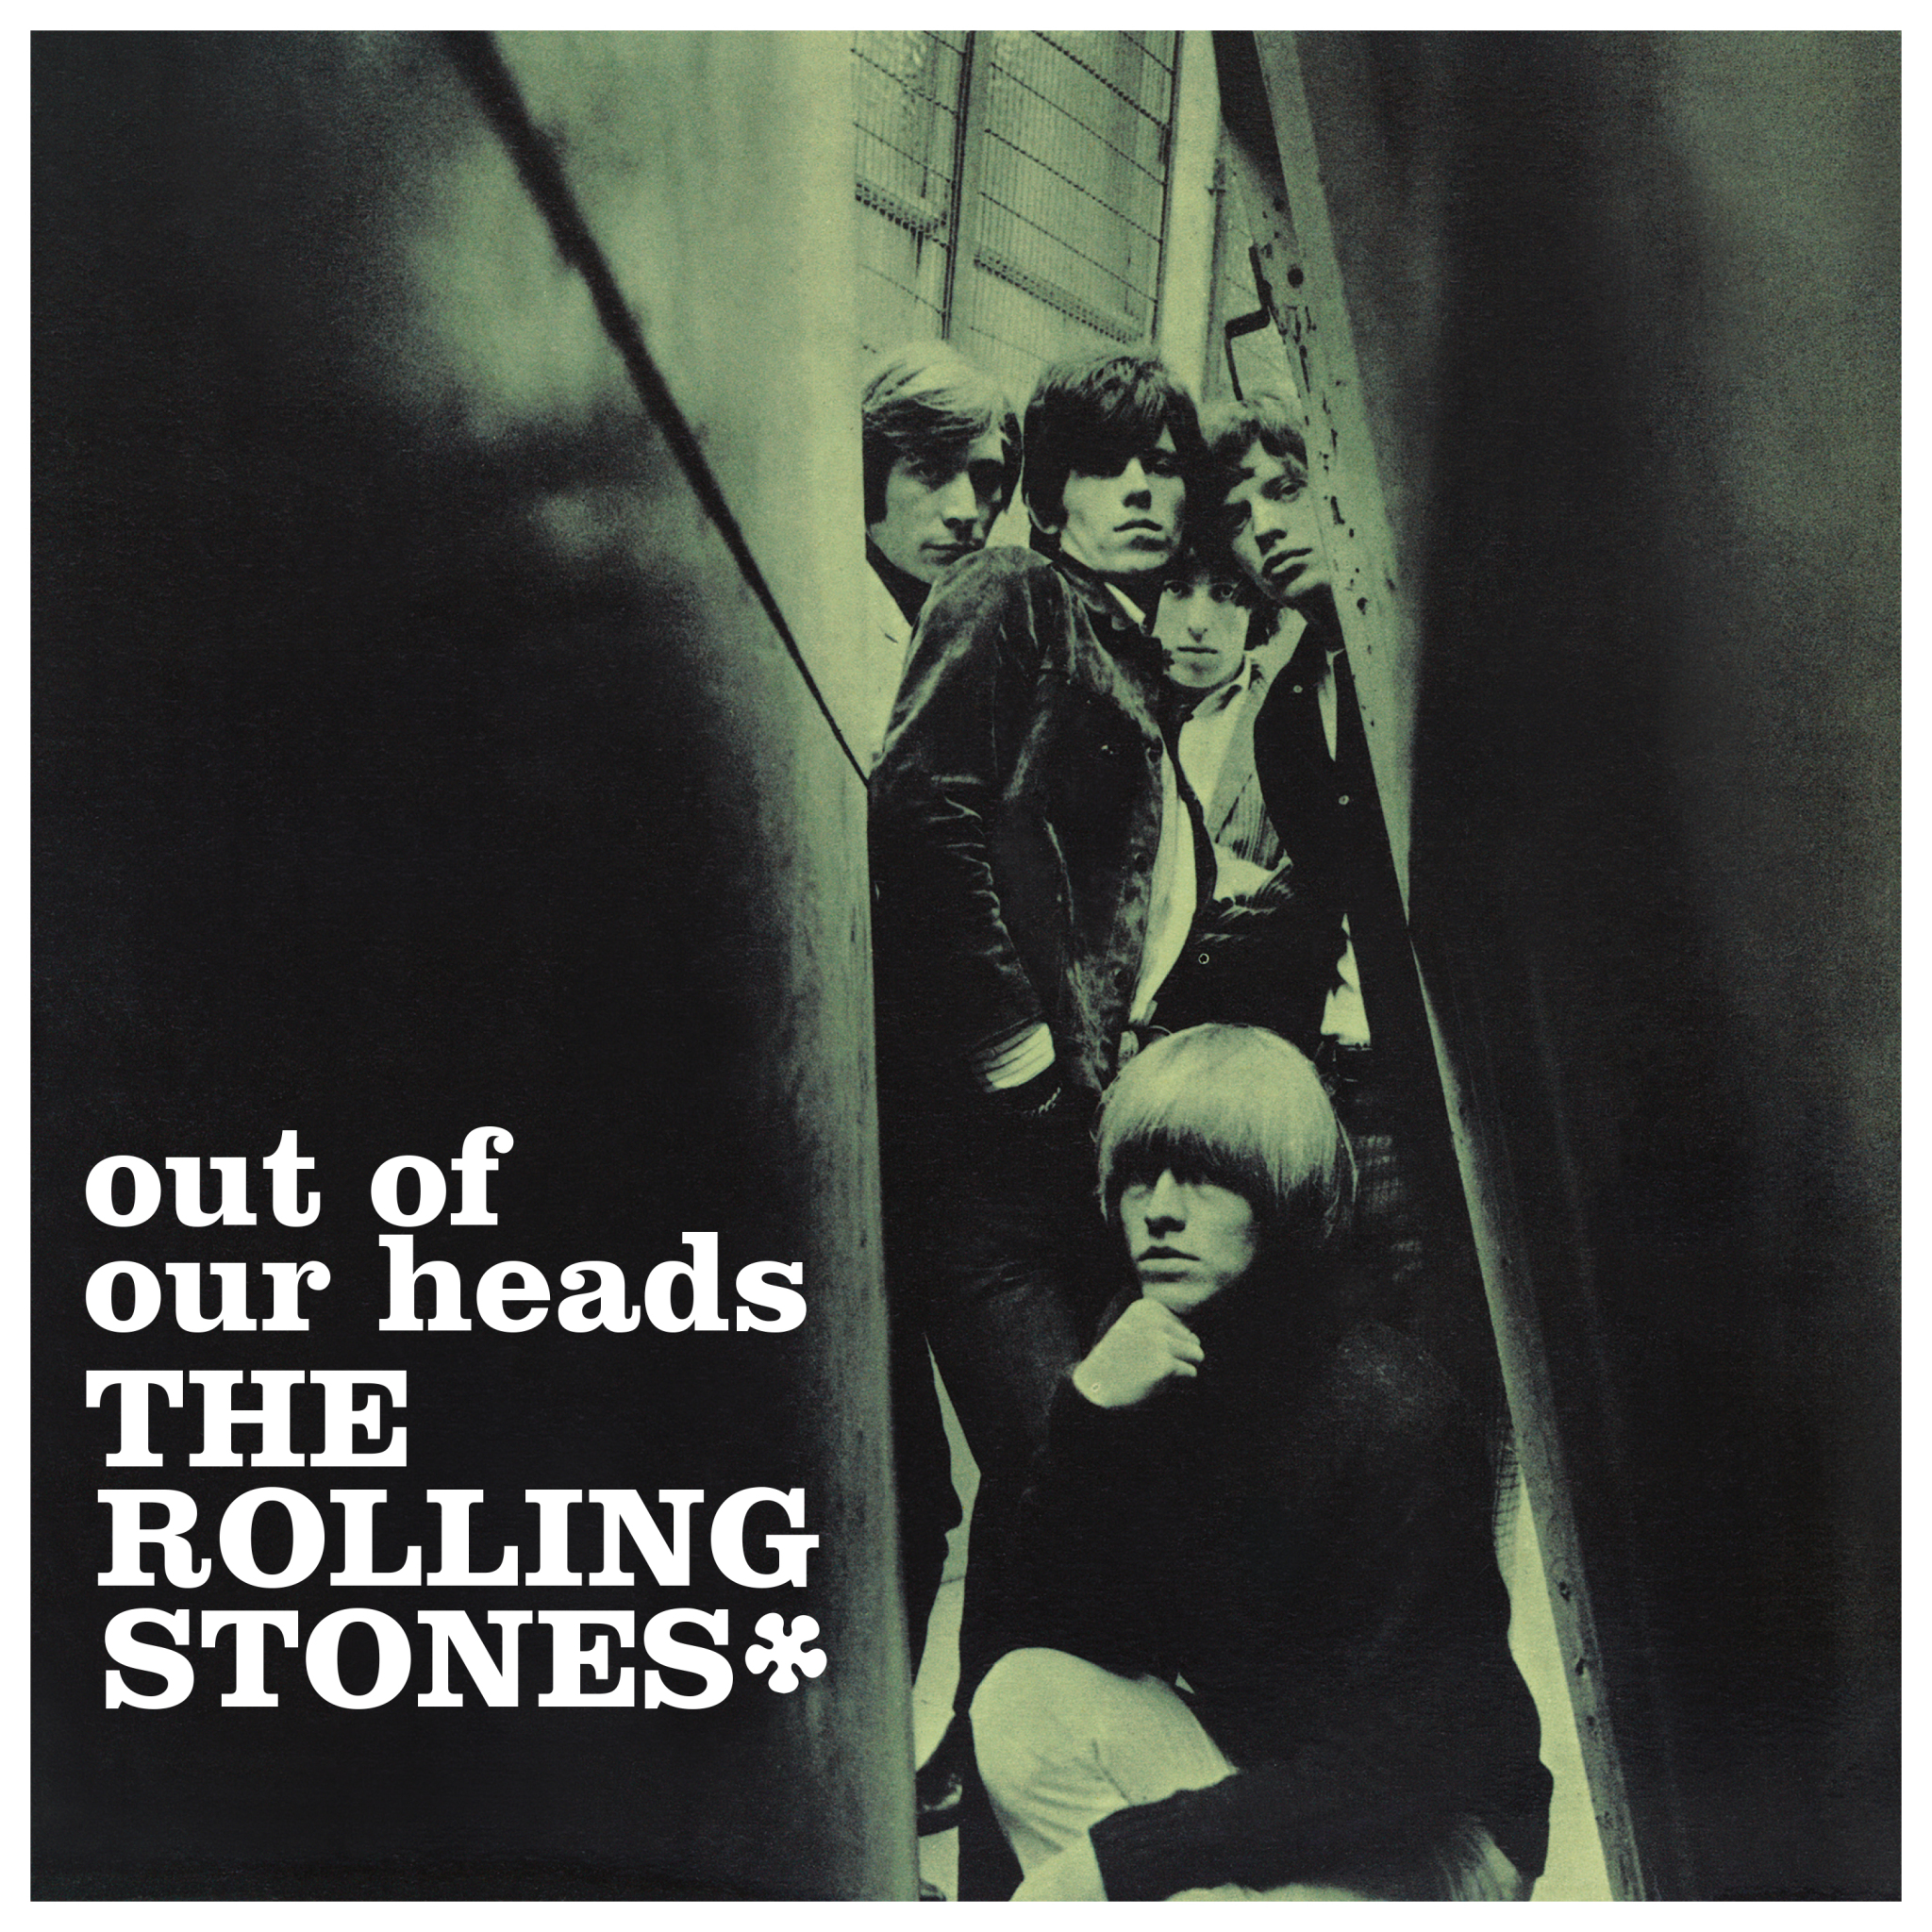 CD Shop - ROLLING STONES OUT OF OUR HEADS